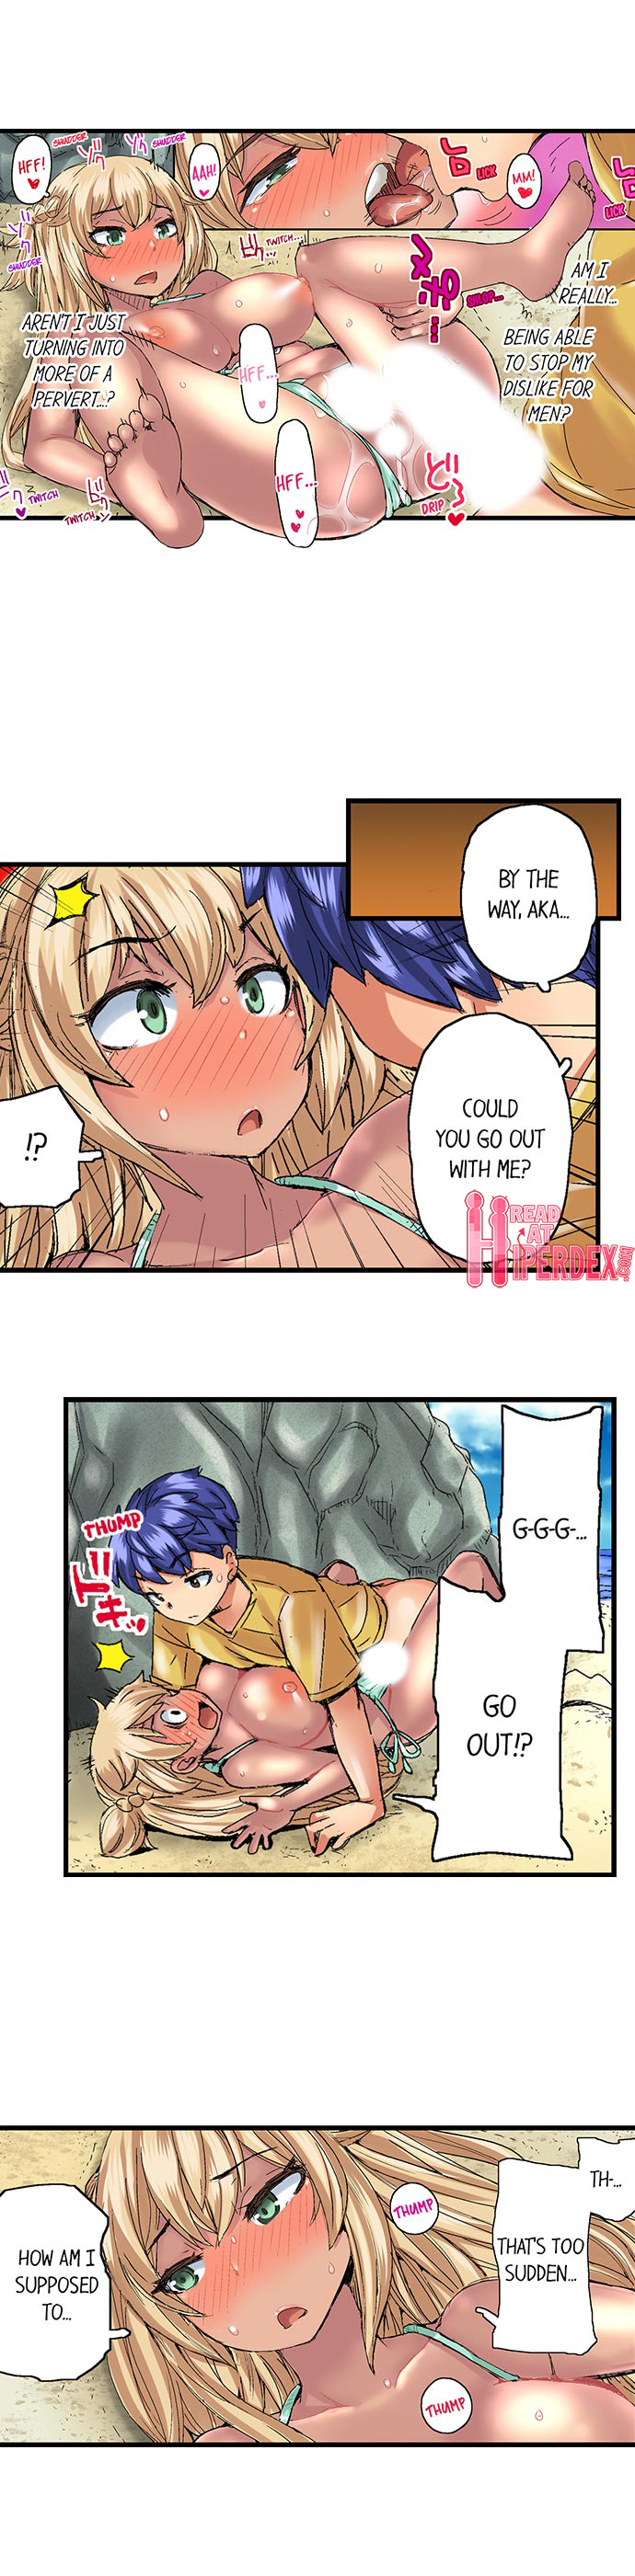 Taking a Hot Tanned Chick’s Virginity - Chapter 18 Page 8